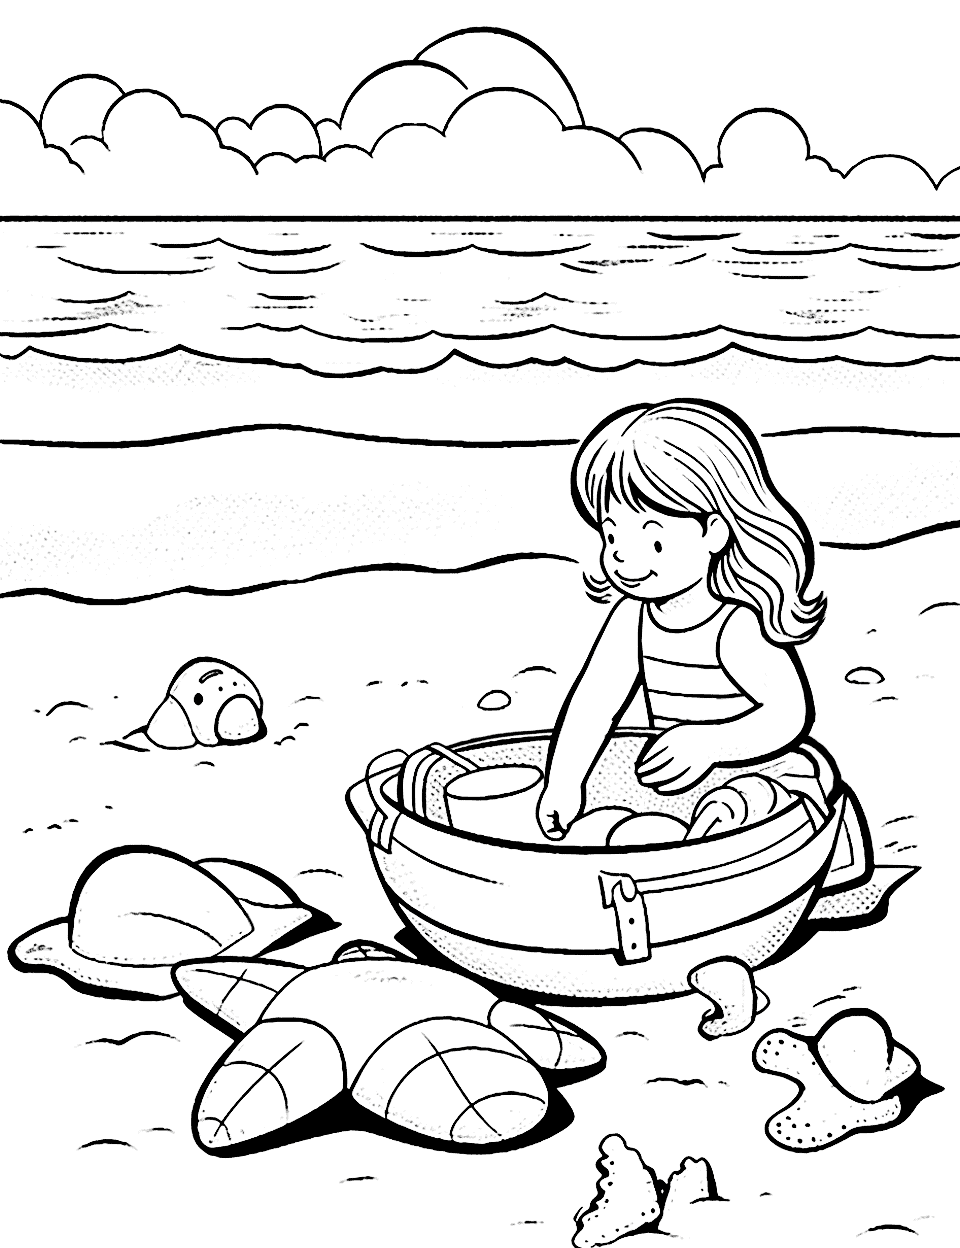 Toddler's Beach Day Summer Coloring Page - A toddler playing with beach toys on a sunny beach, building sandcastles, and collecting seashells.